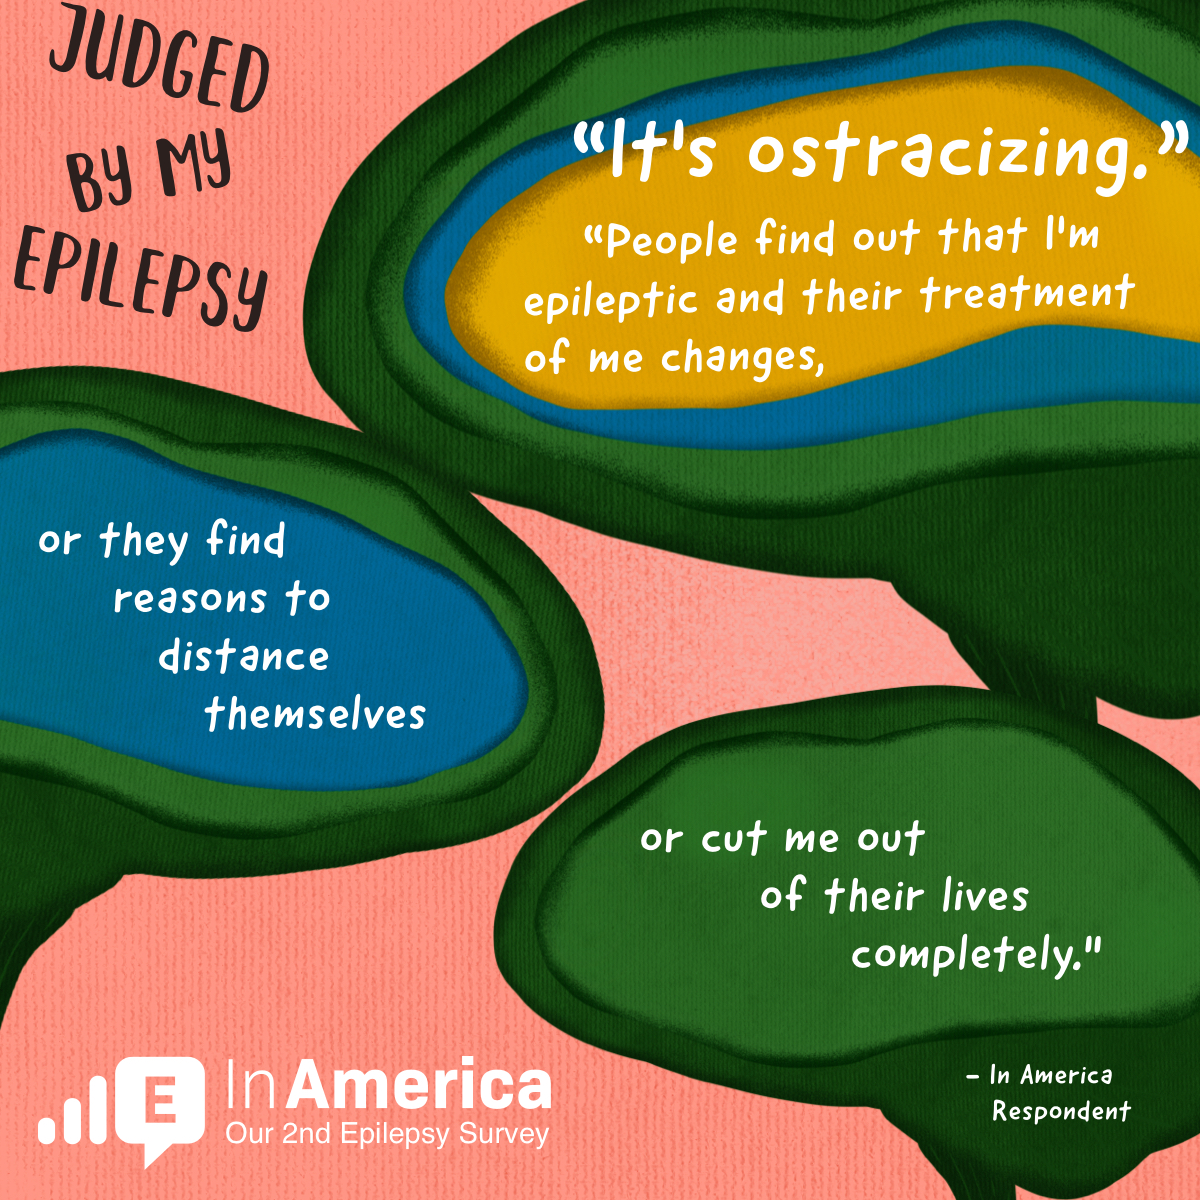 One In America respondent said, "It's ostracizing. People find out that I'm epileptic and their treatment of me changes, or they find reasons to distance themselves or cut me out of their lives completely."